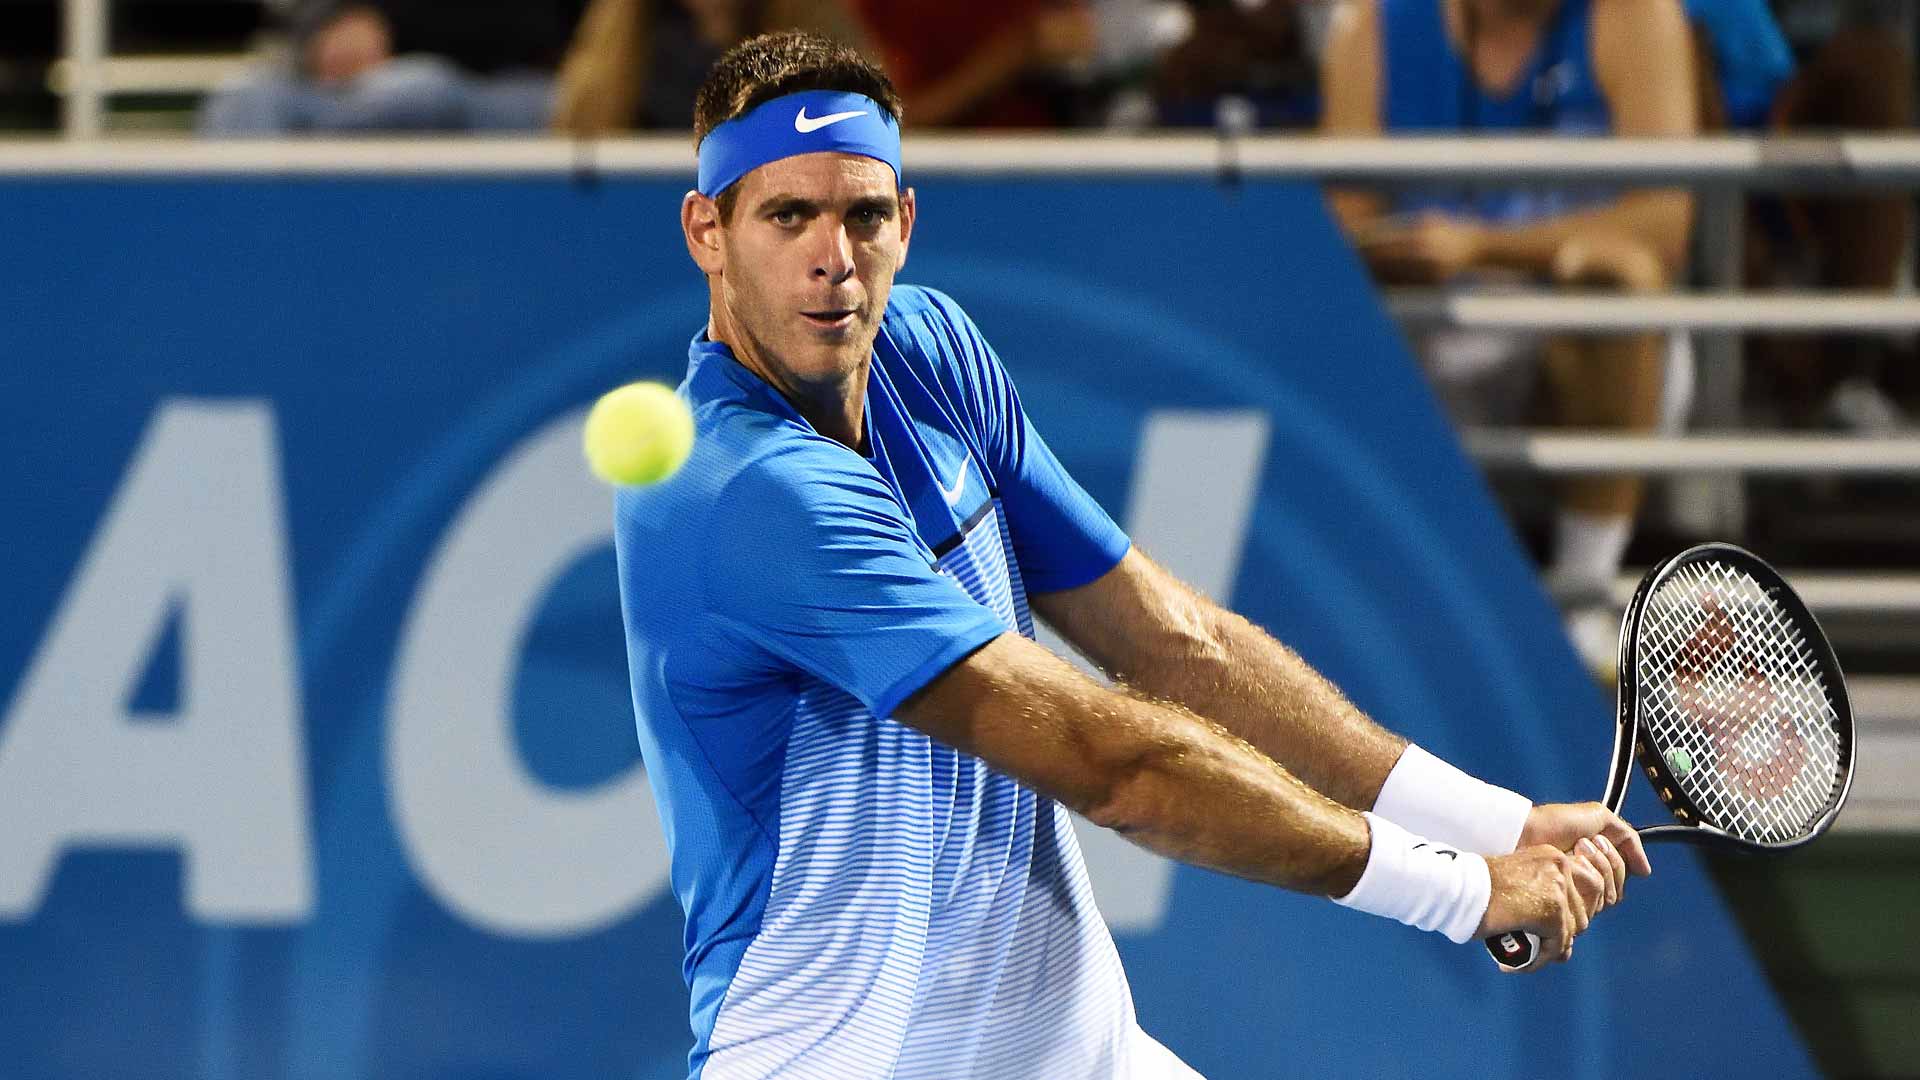 Del Potro's Ongoing Rise to